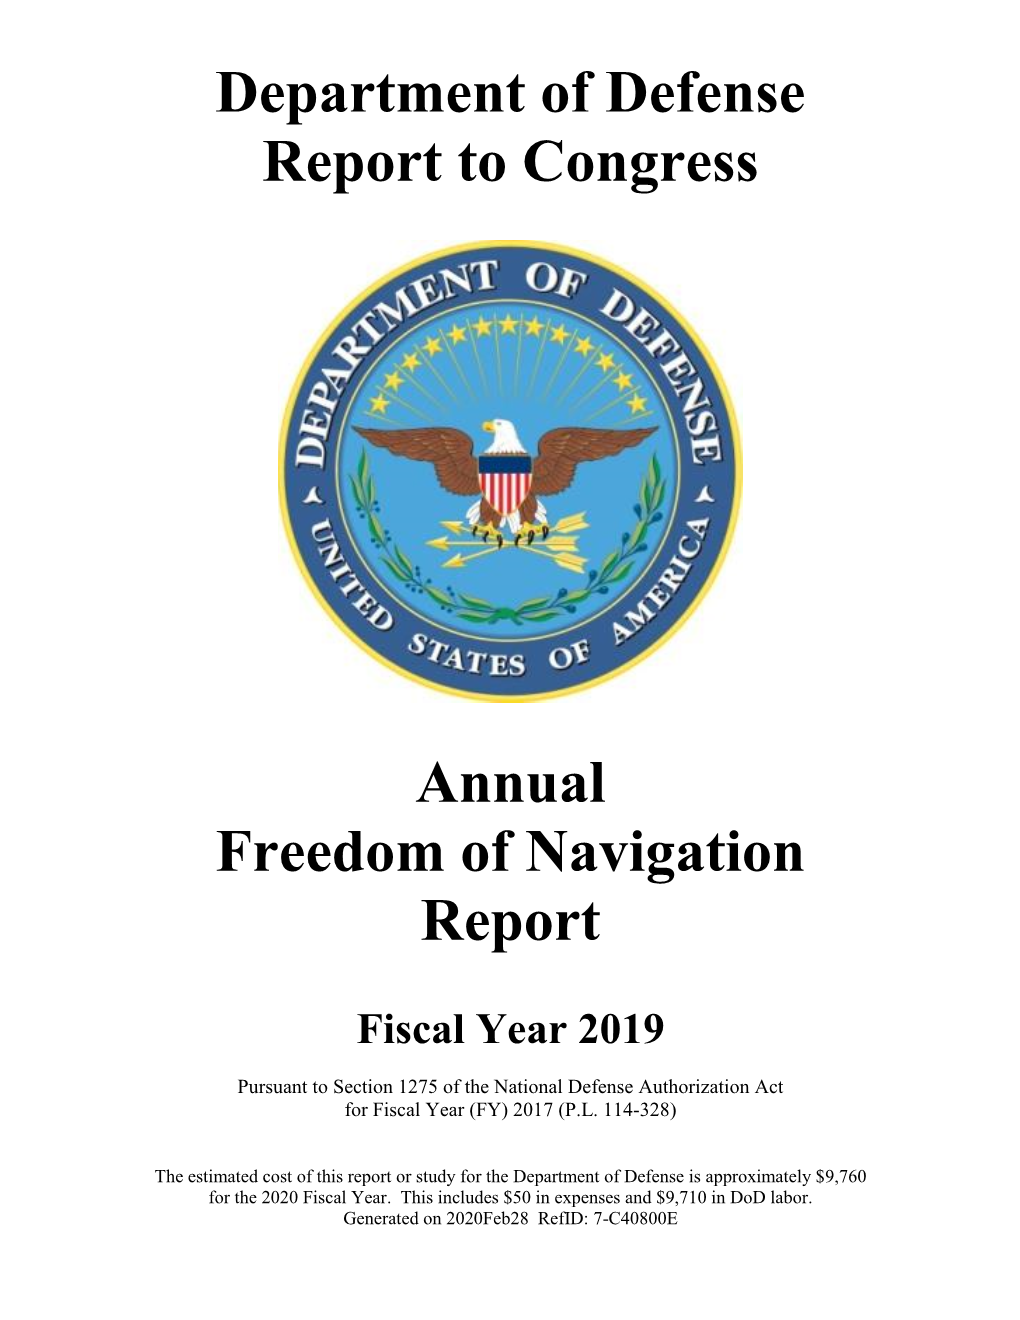 Department of Defense Report to Congress Annual Freedom Of